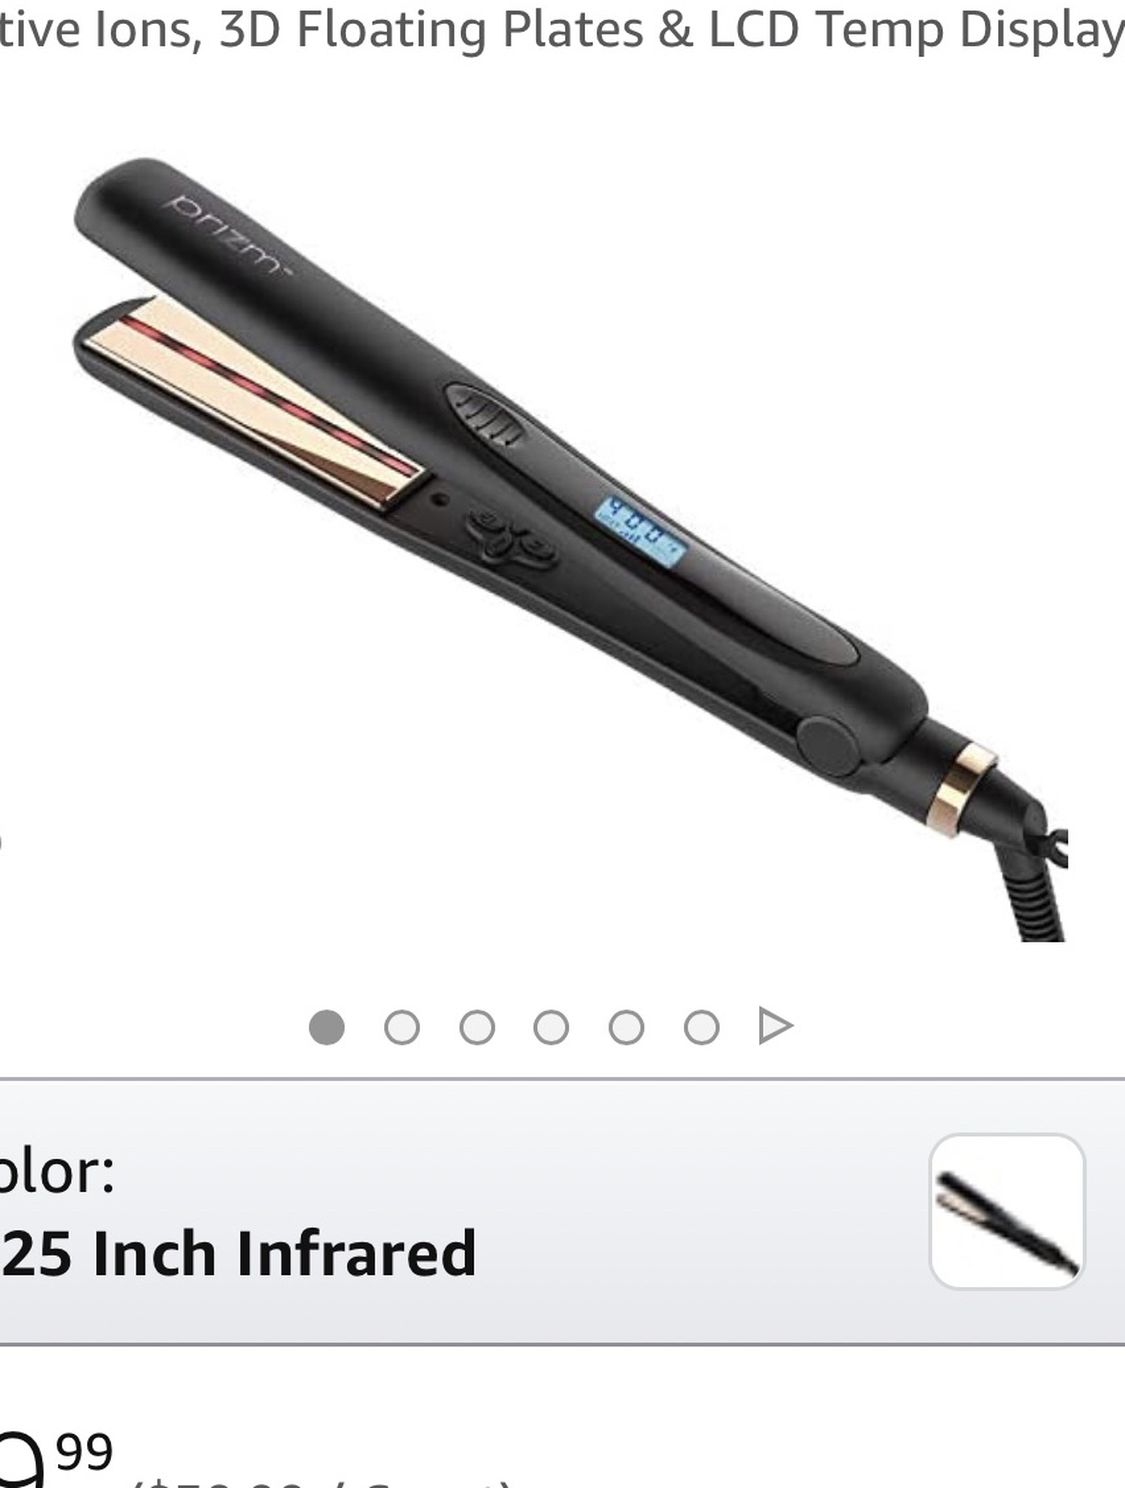 NEW! 2 In 1 Straightener and Curling Iron, Professional 1 Styling Flat Iron, Nano Ceramic Tourmaline 3D Floating Plates Hair Straightener, Digital LCD